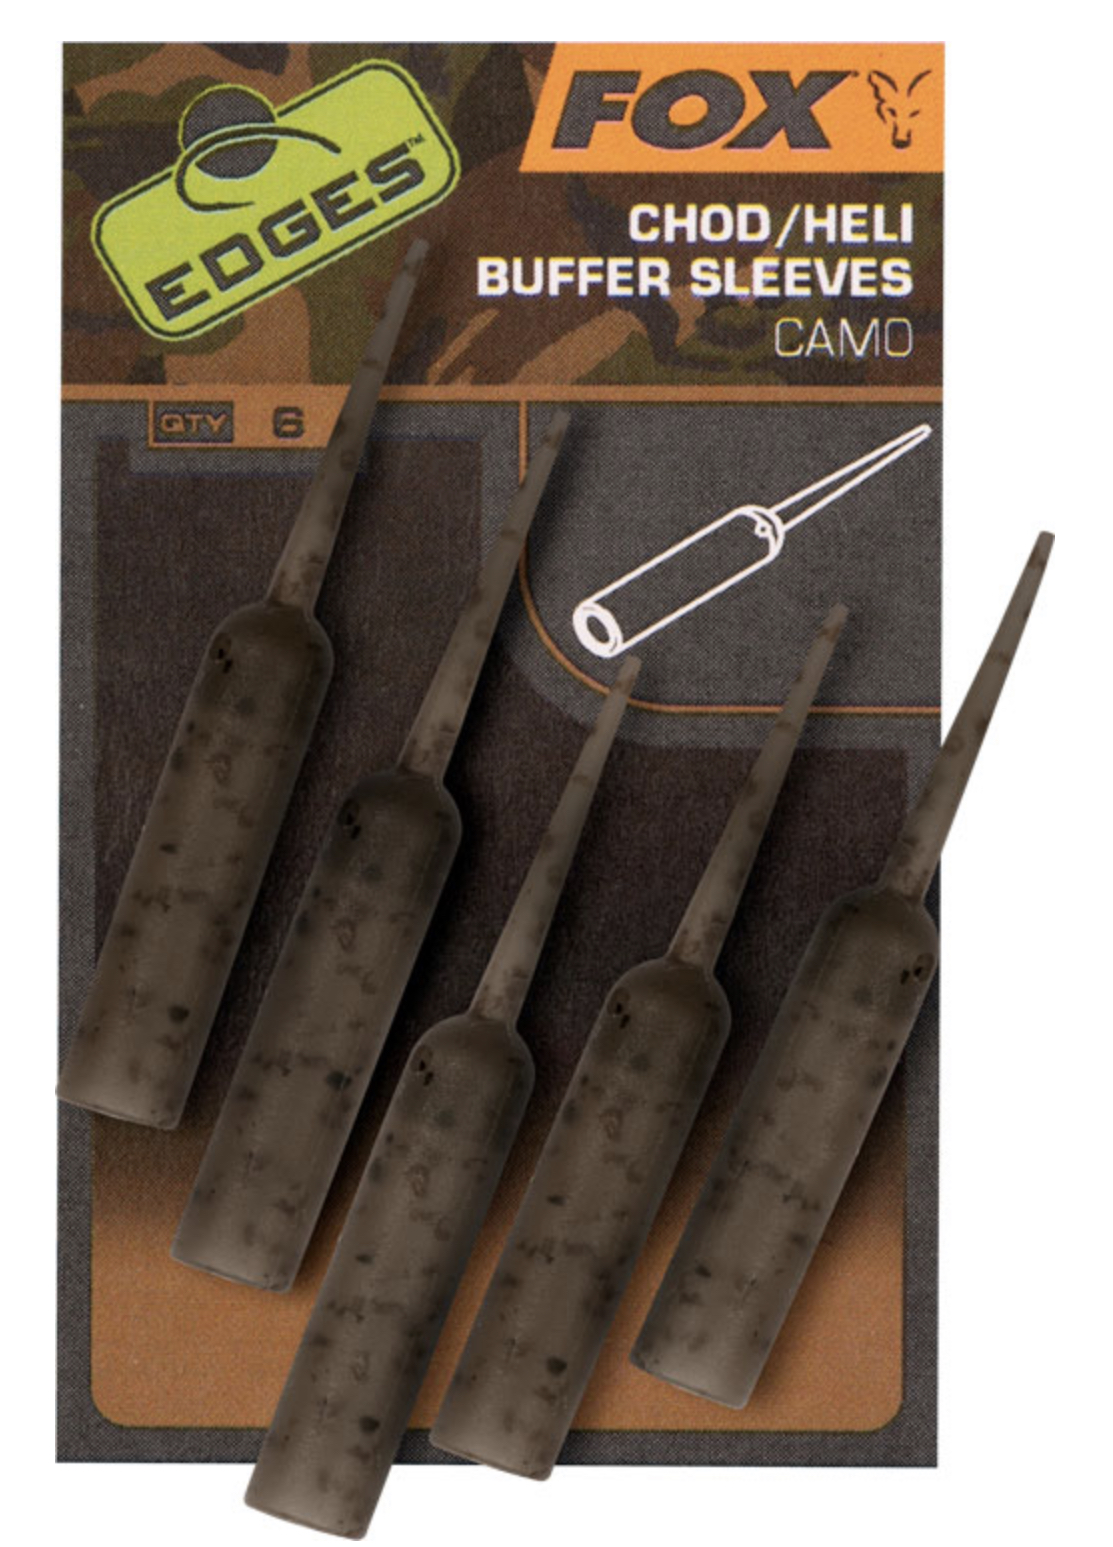 Fox EDGES Camo Naked Chod/Hell Buffer Sleeves - Click Image to Close